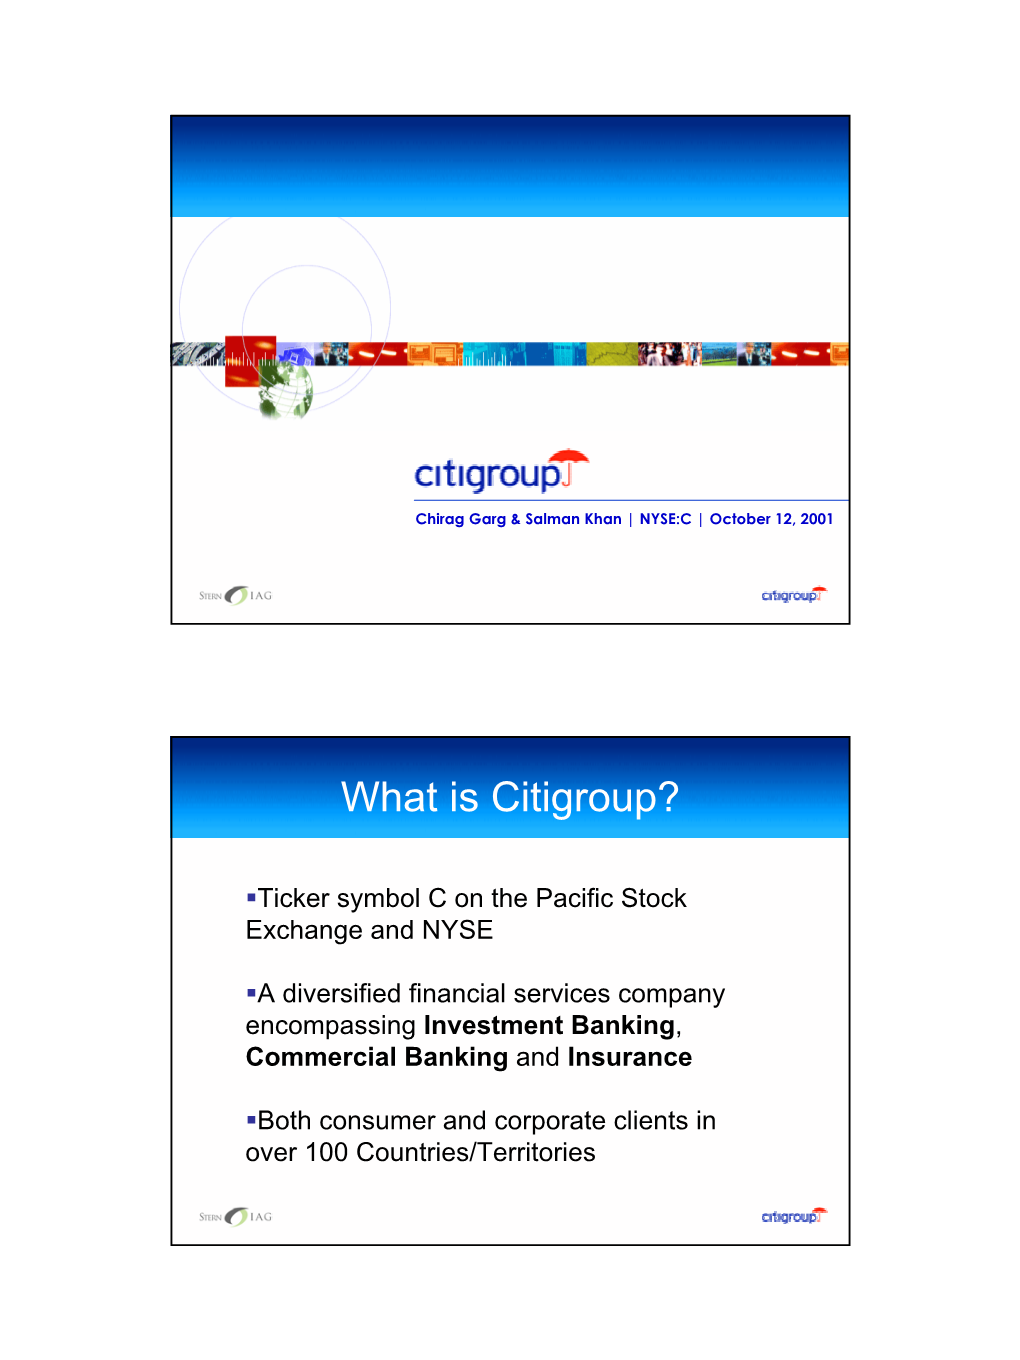 What Is Citigroup?